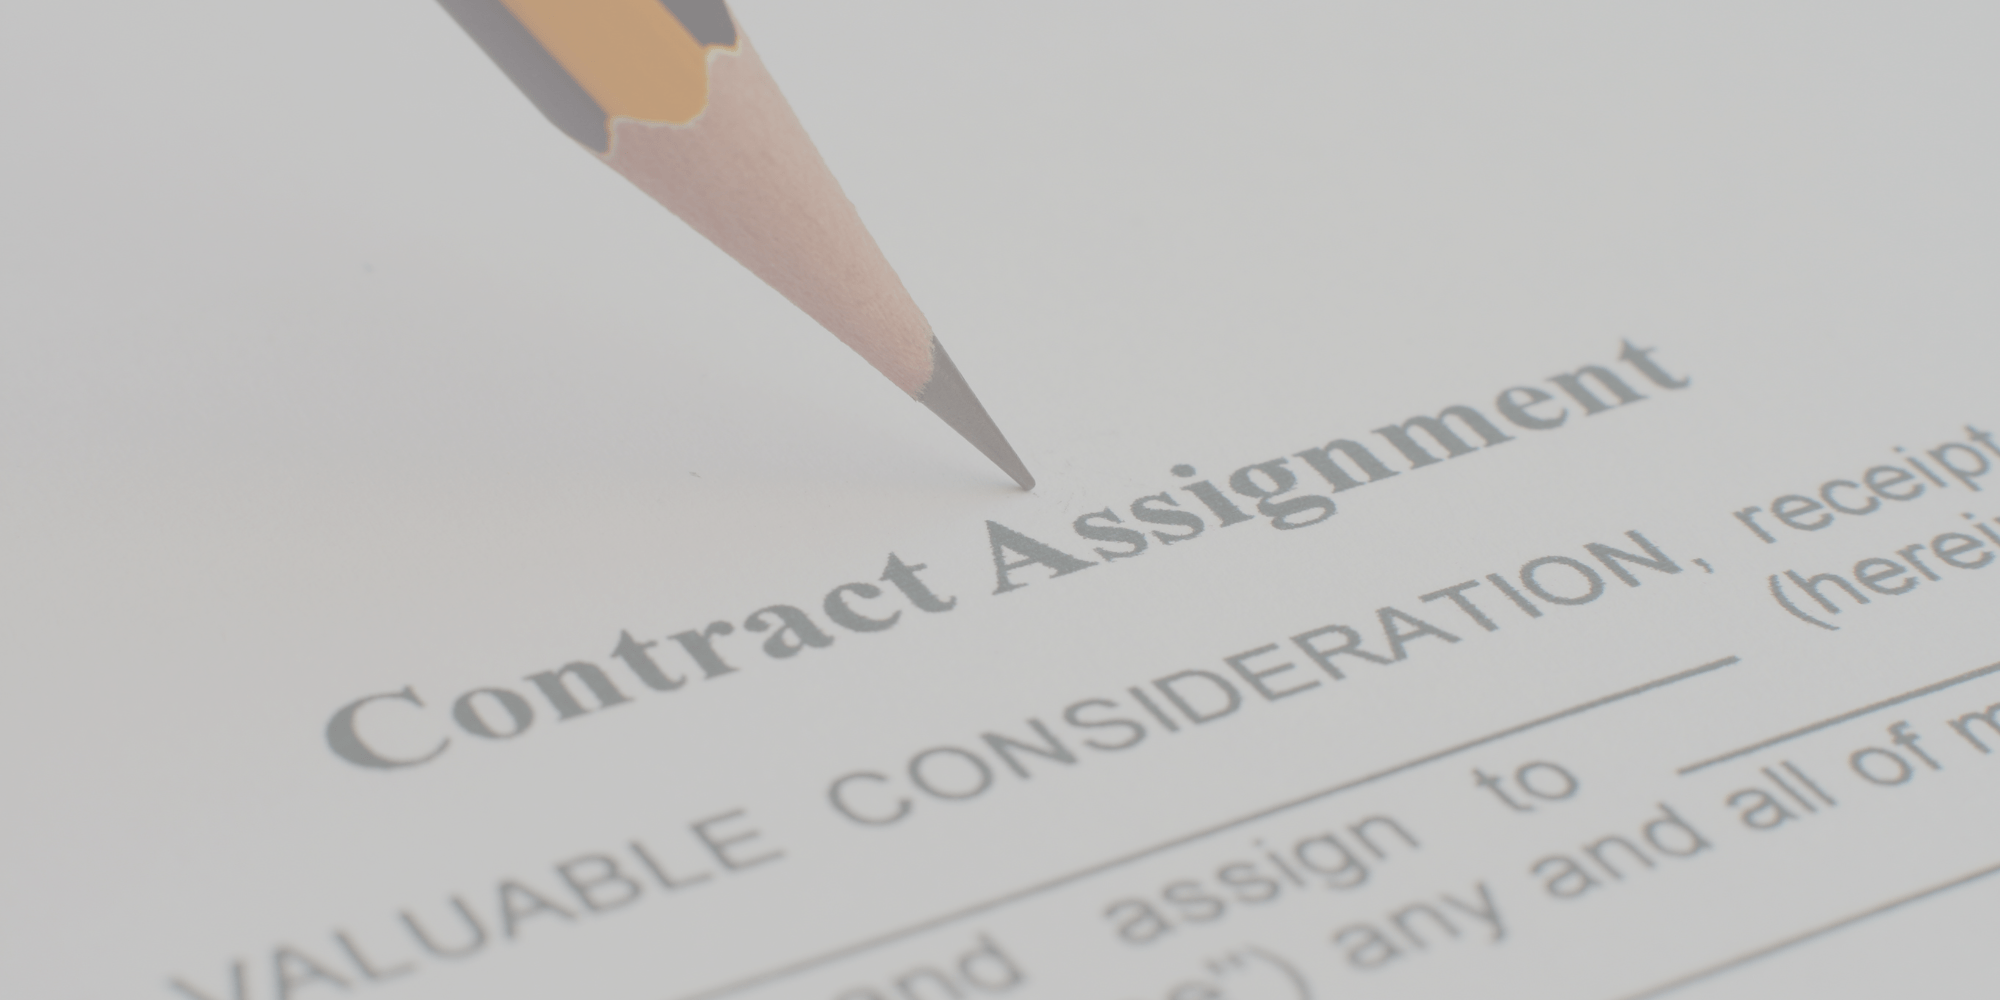 Negotiating and Drafting Solid Wholesaling Contracts